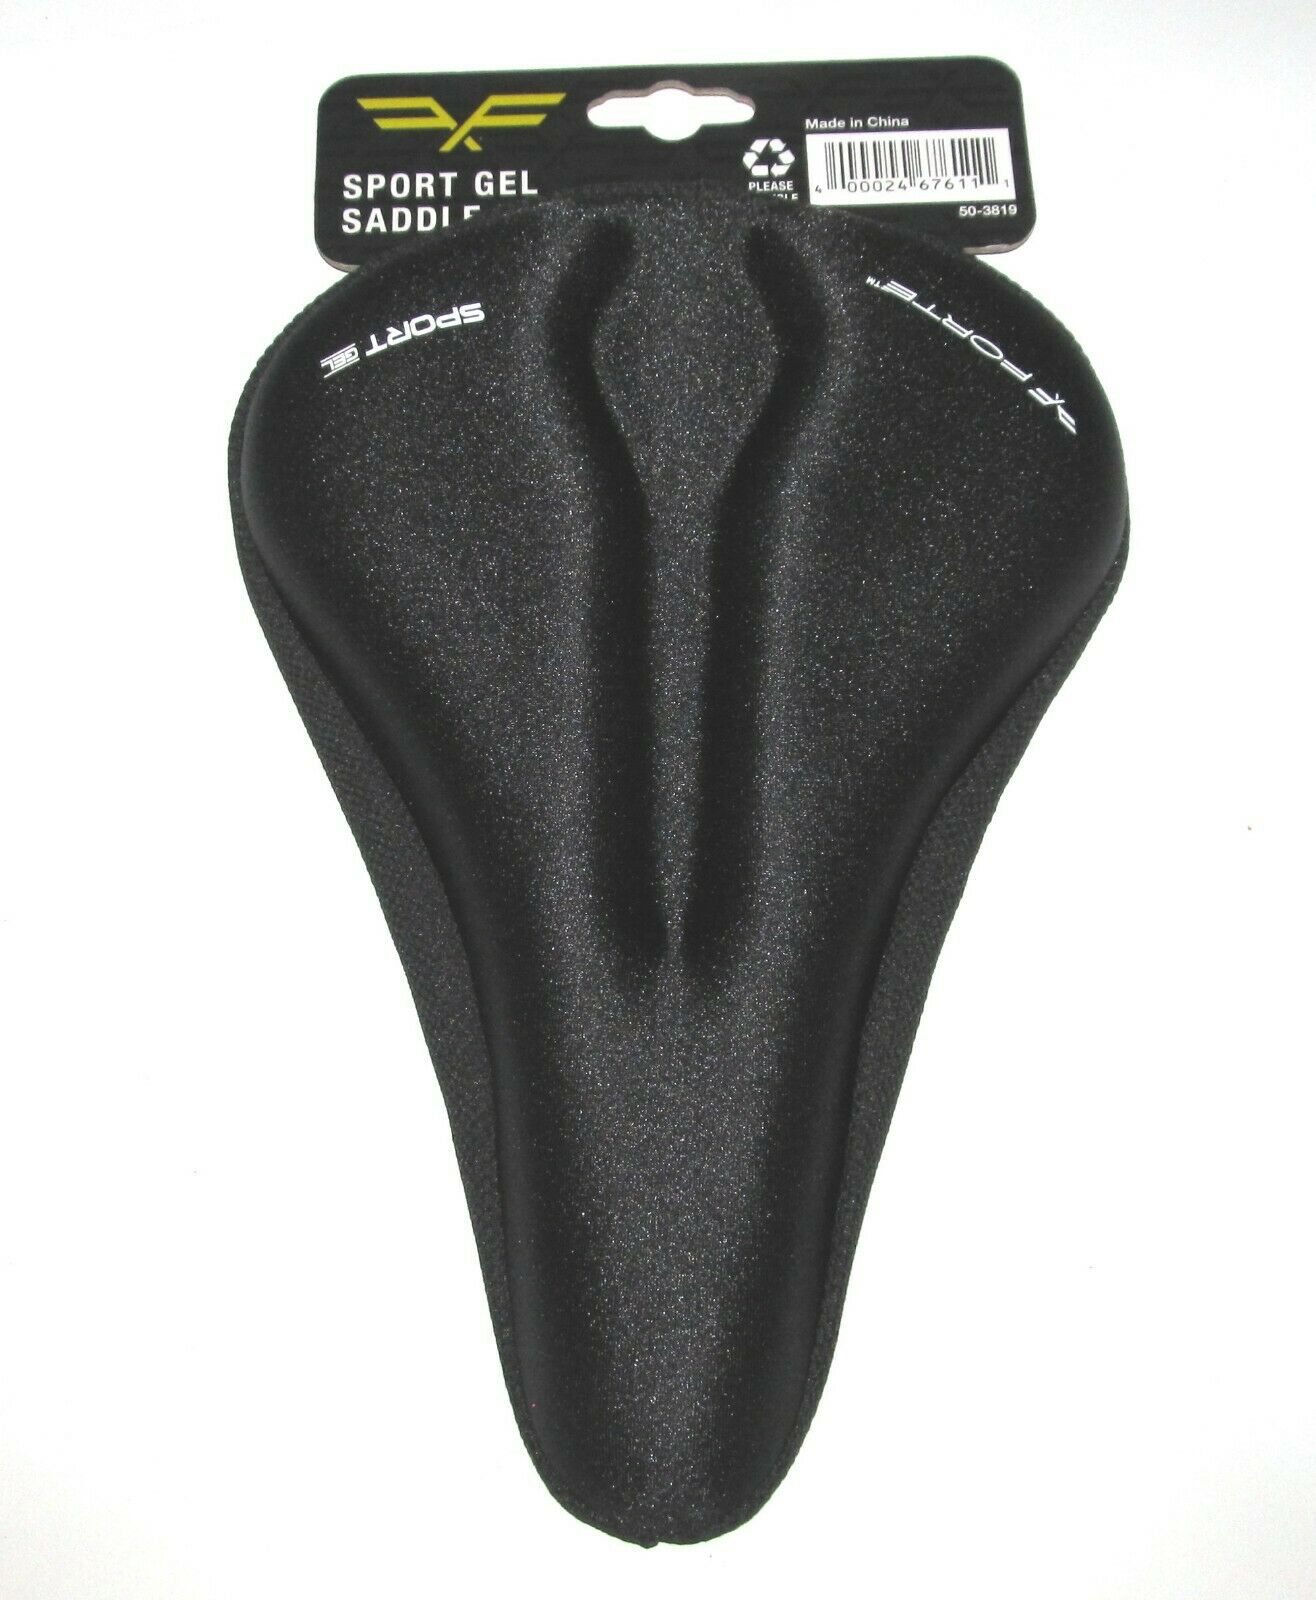 Forte' Sport Gel Bicycle Saddle Cover Seat Pad New 50-3819 Free Shipping